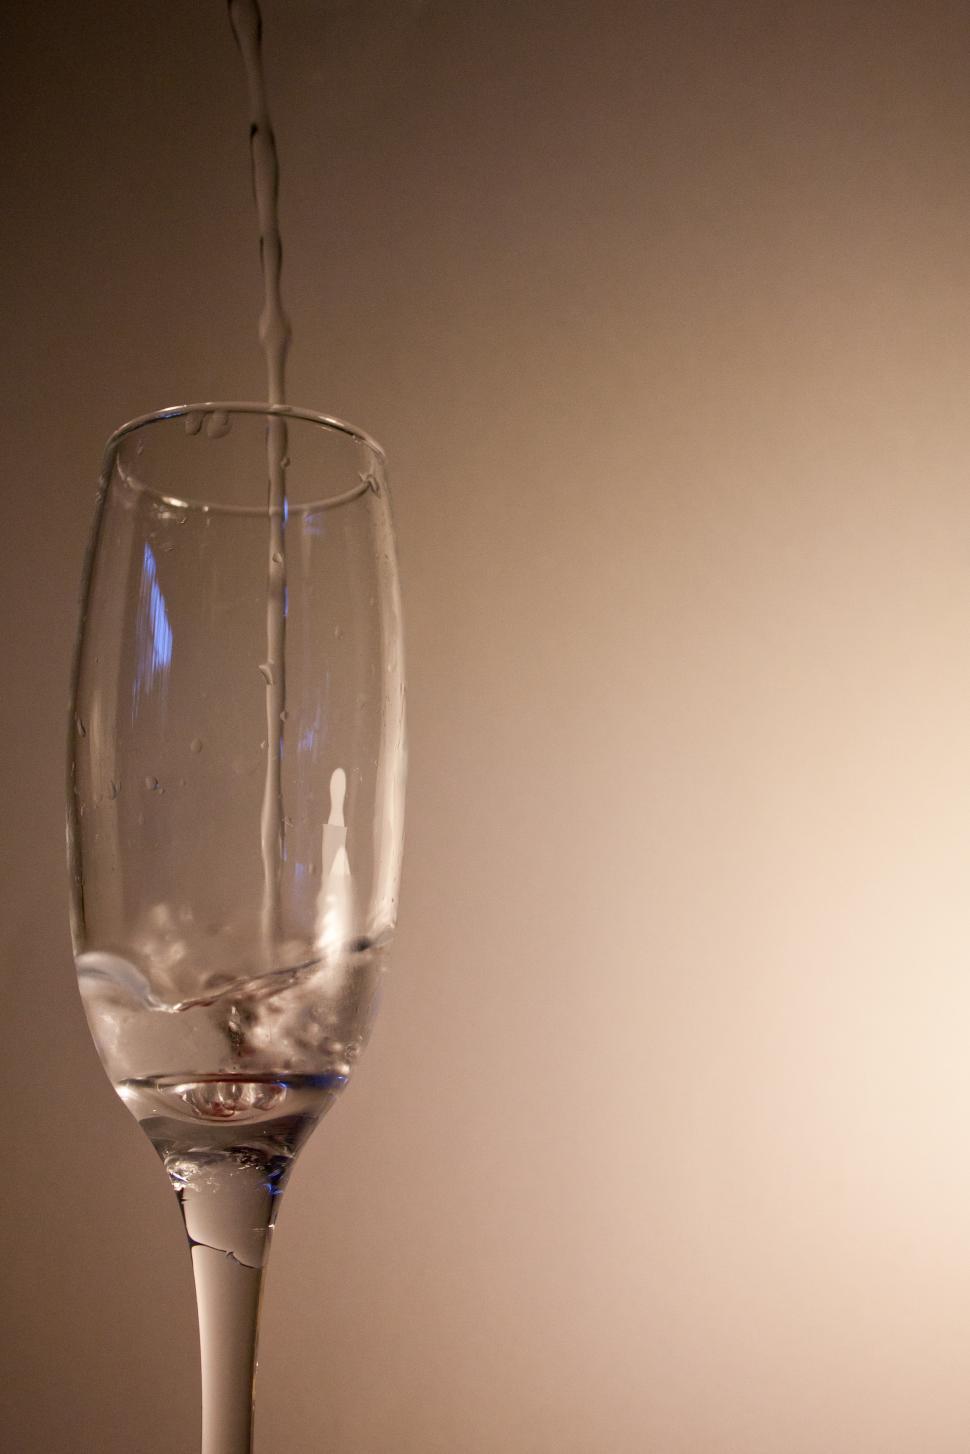 Free Image of Water Being Poured Into a Glass 